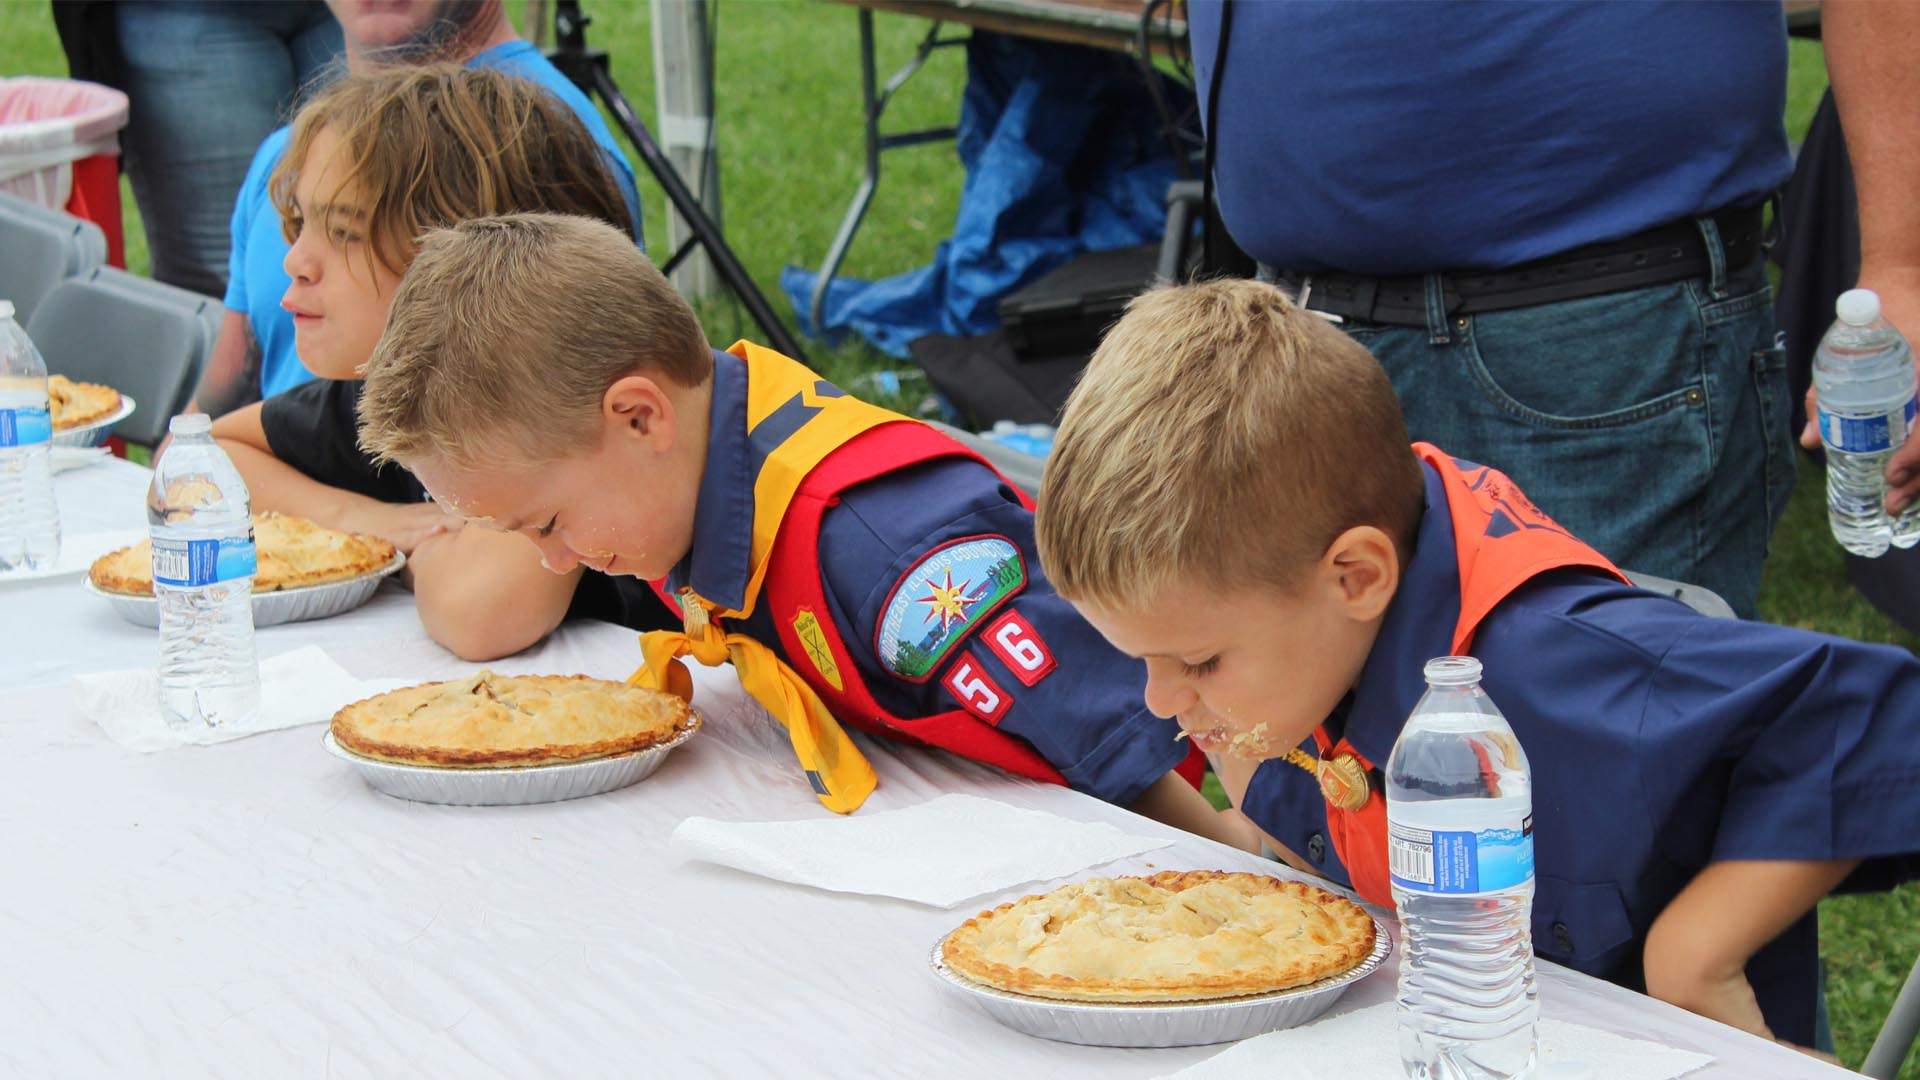 Boys taking part in a pie eating competition at the Long Grove Strawberry Fest